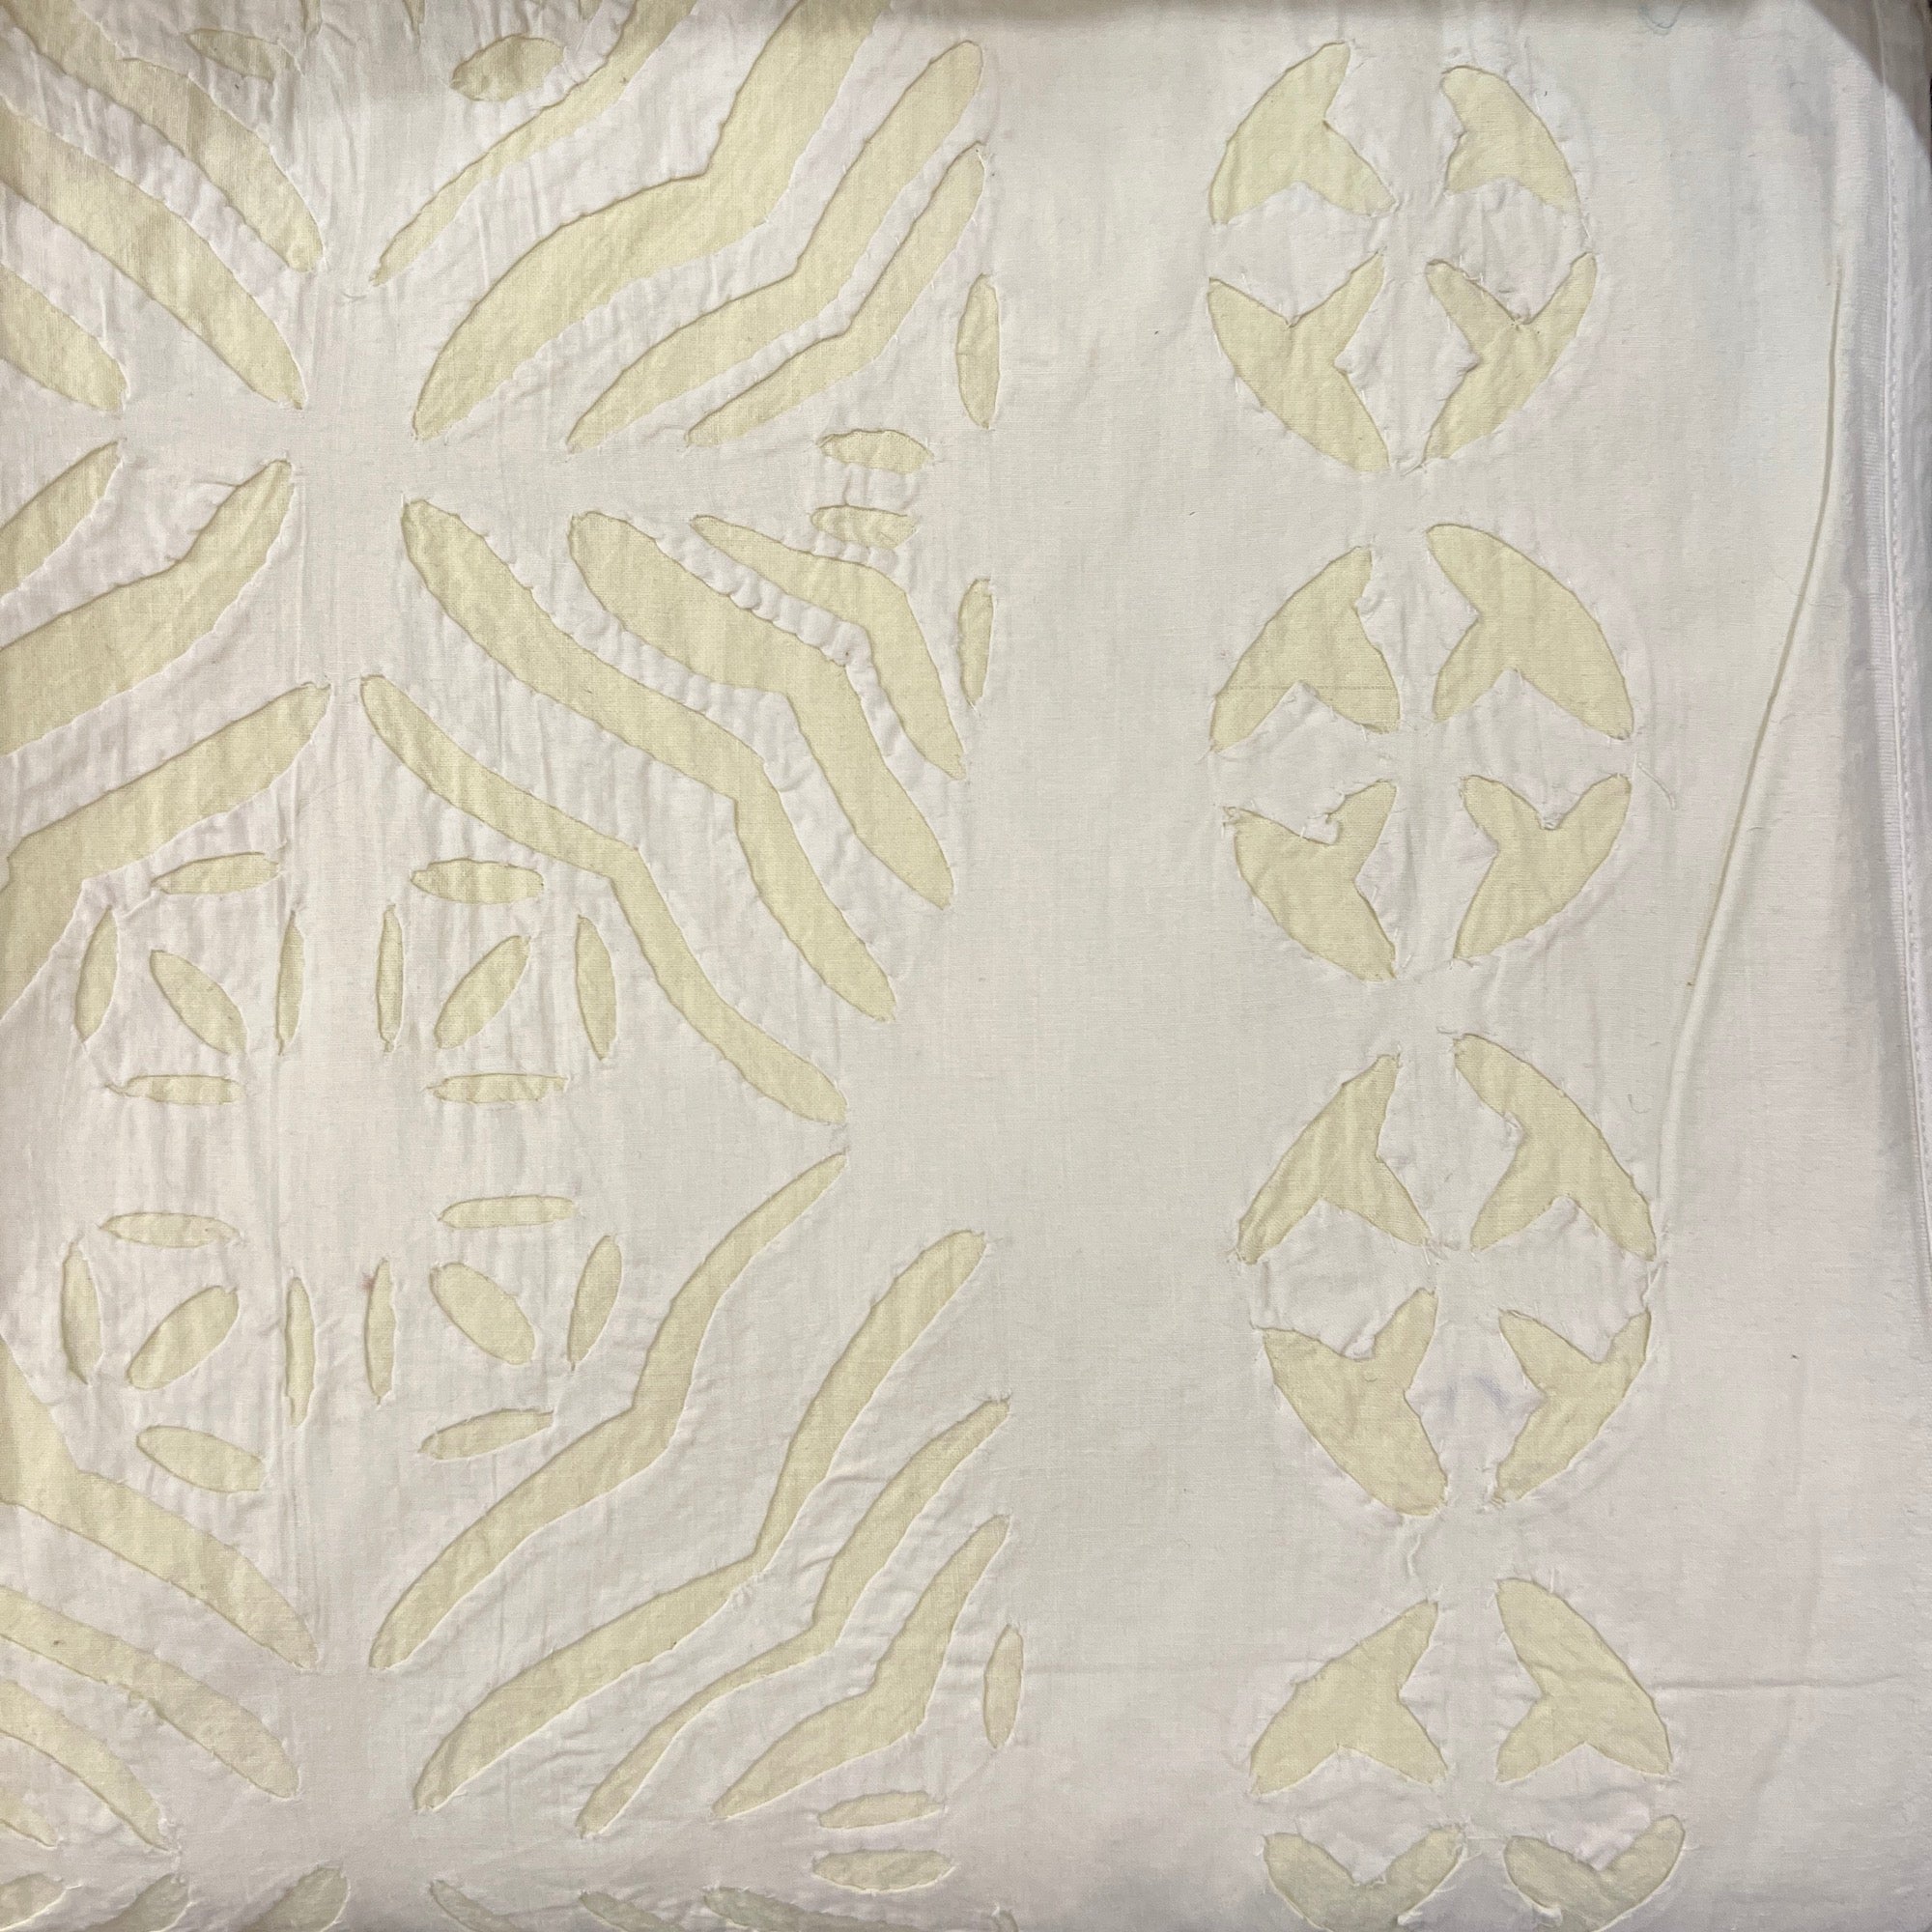 Hand Made Applique Bedcover-6 Colors - Vintage India NYC